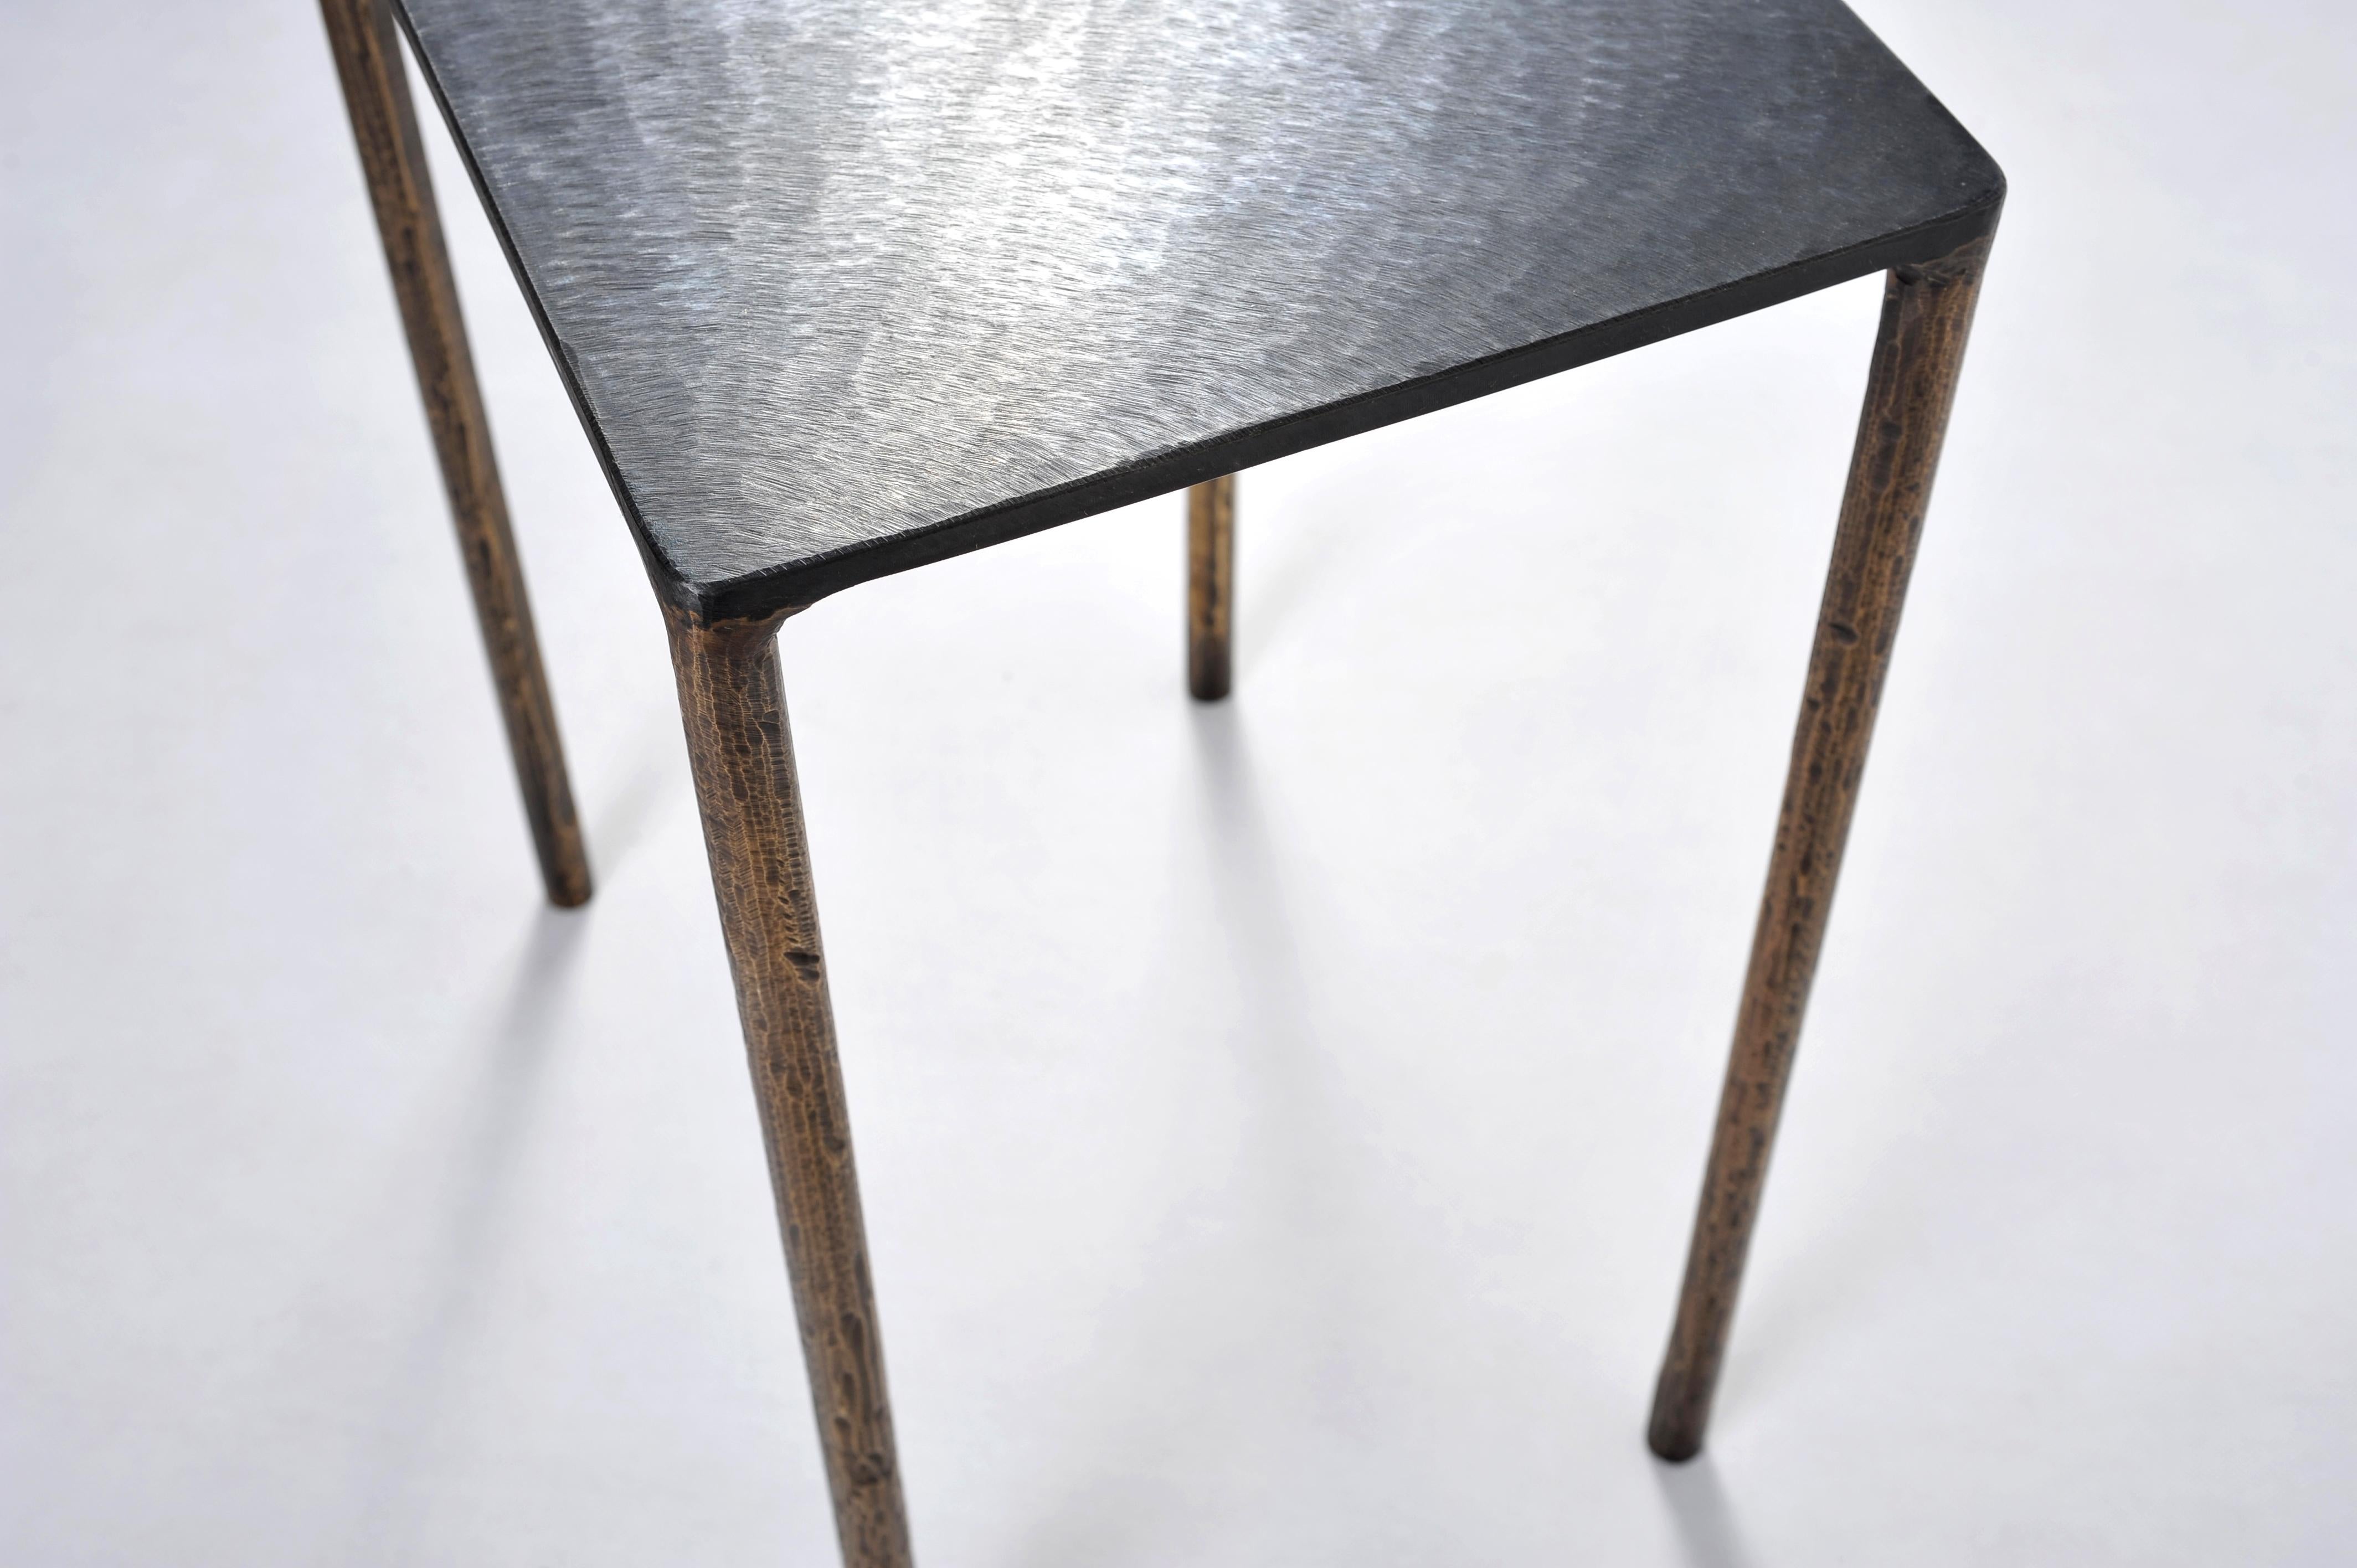 Brass side table signed by Lukasz Friedrich
Textured side or coffee table
Materials: Legs: Legs, patinated brass; top, patinated and waxed steel
Dimensions: D 28 cm, L 38 cm, H 50 cm
Signed and dated

Lukasz Friedrich (born 1980), lives and works in